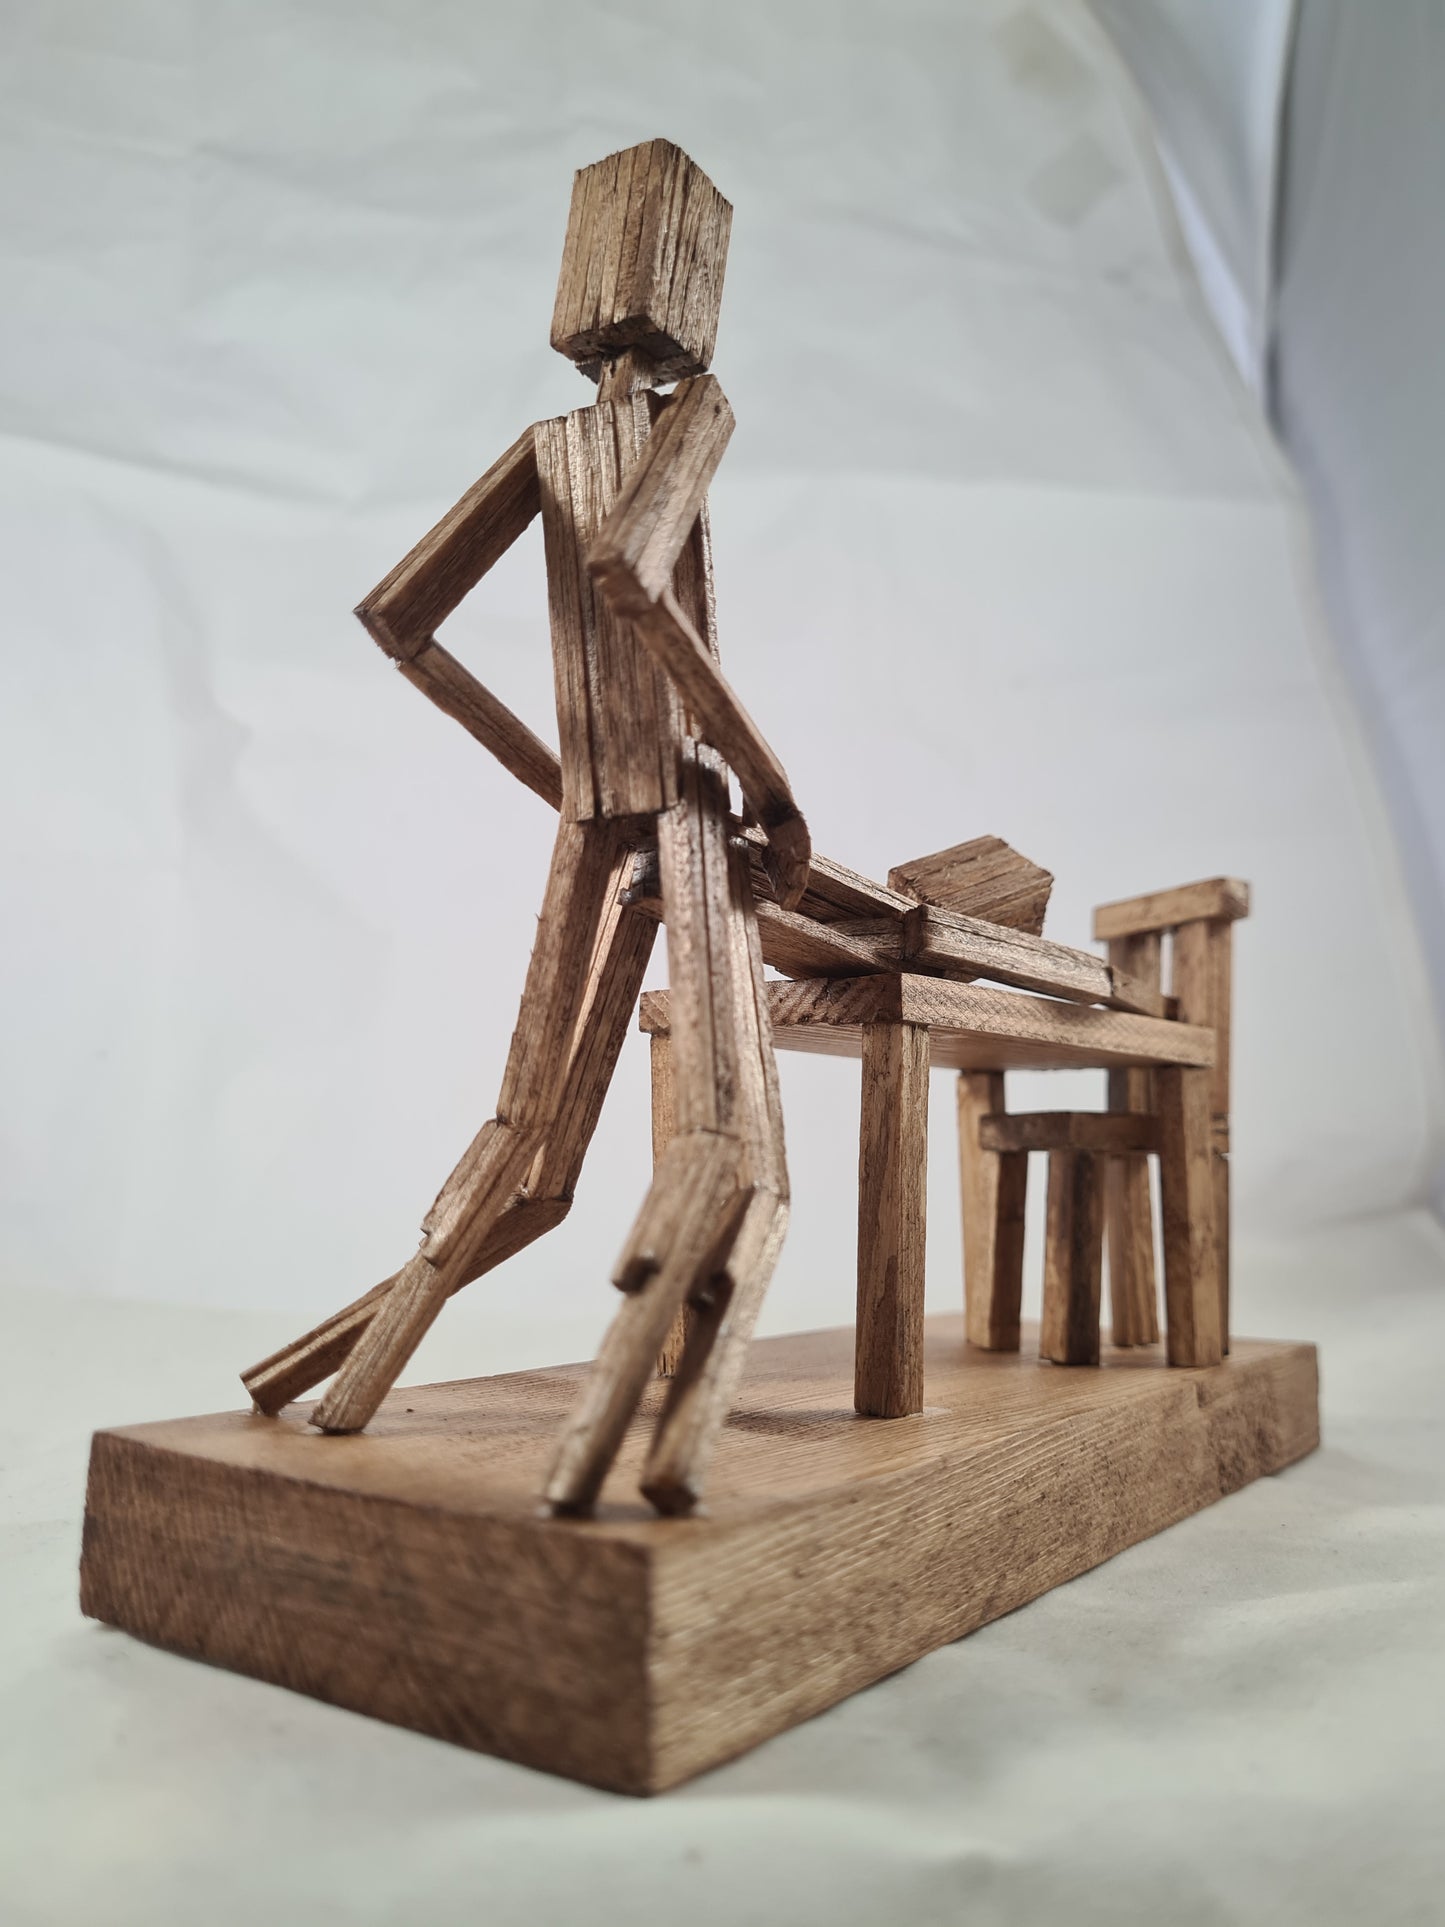 Table Top - Handcrafted Wooden Matchstick Figures - Gifts, Ornaments and Decor By Tiggidy Designs